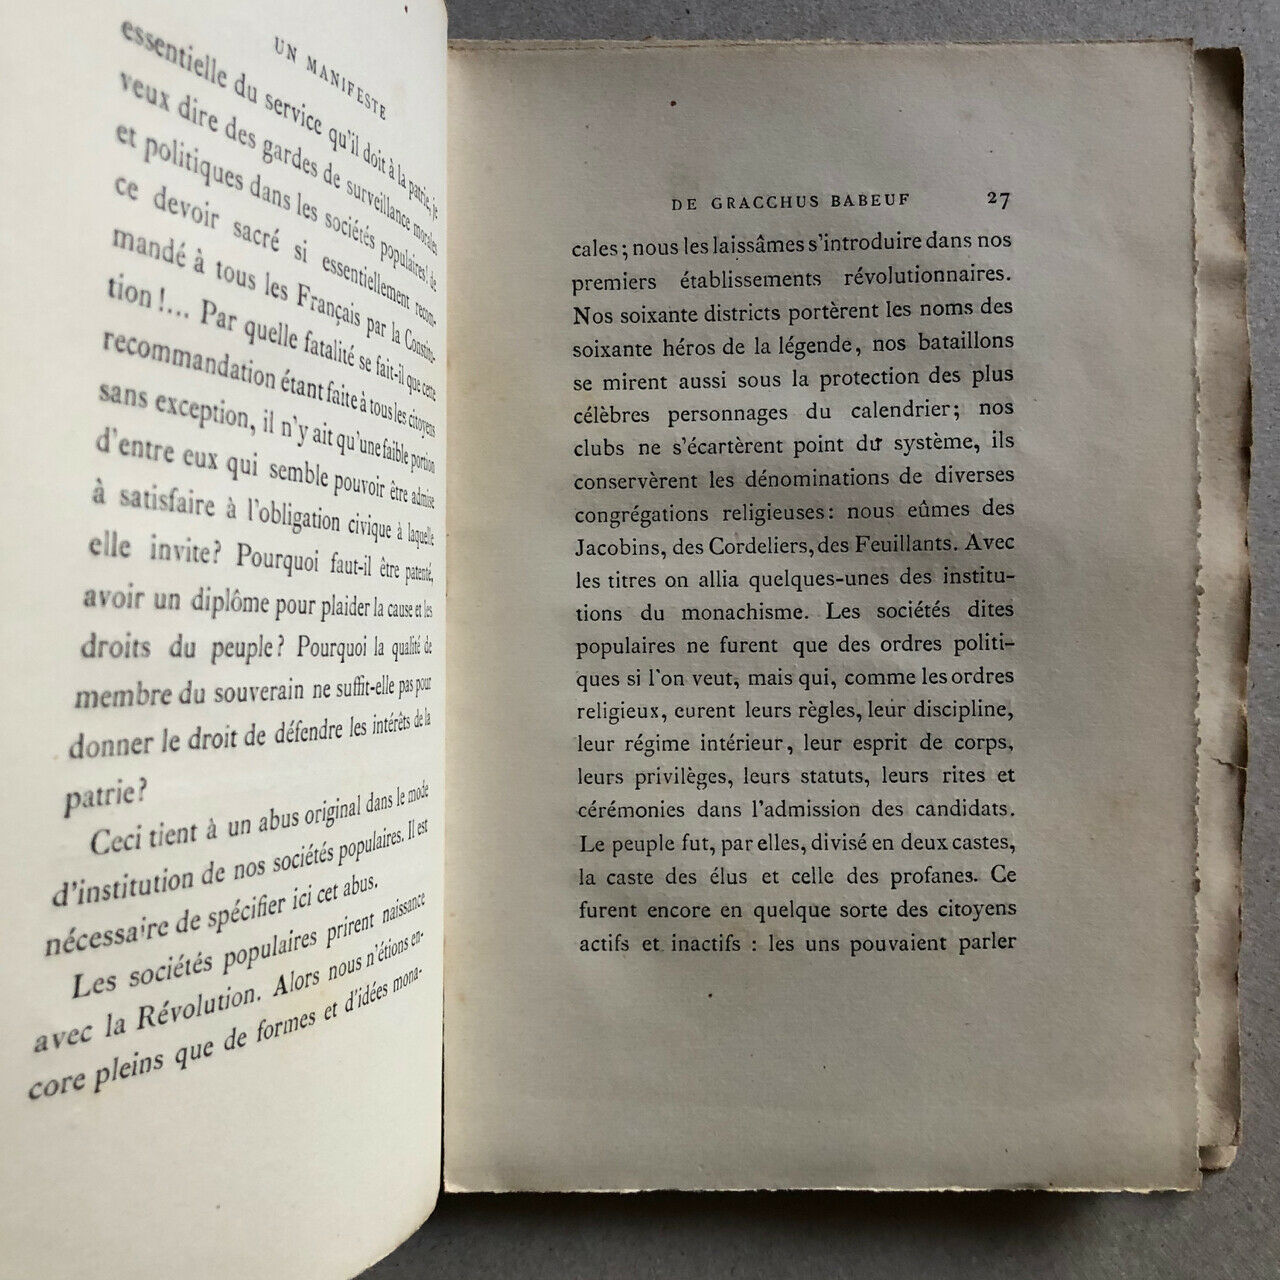 A Manifesto of Gracchus Babeuf published by Georges Lecocq — Bibliophiles — 1885